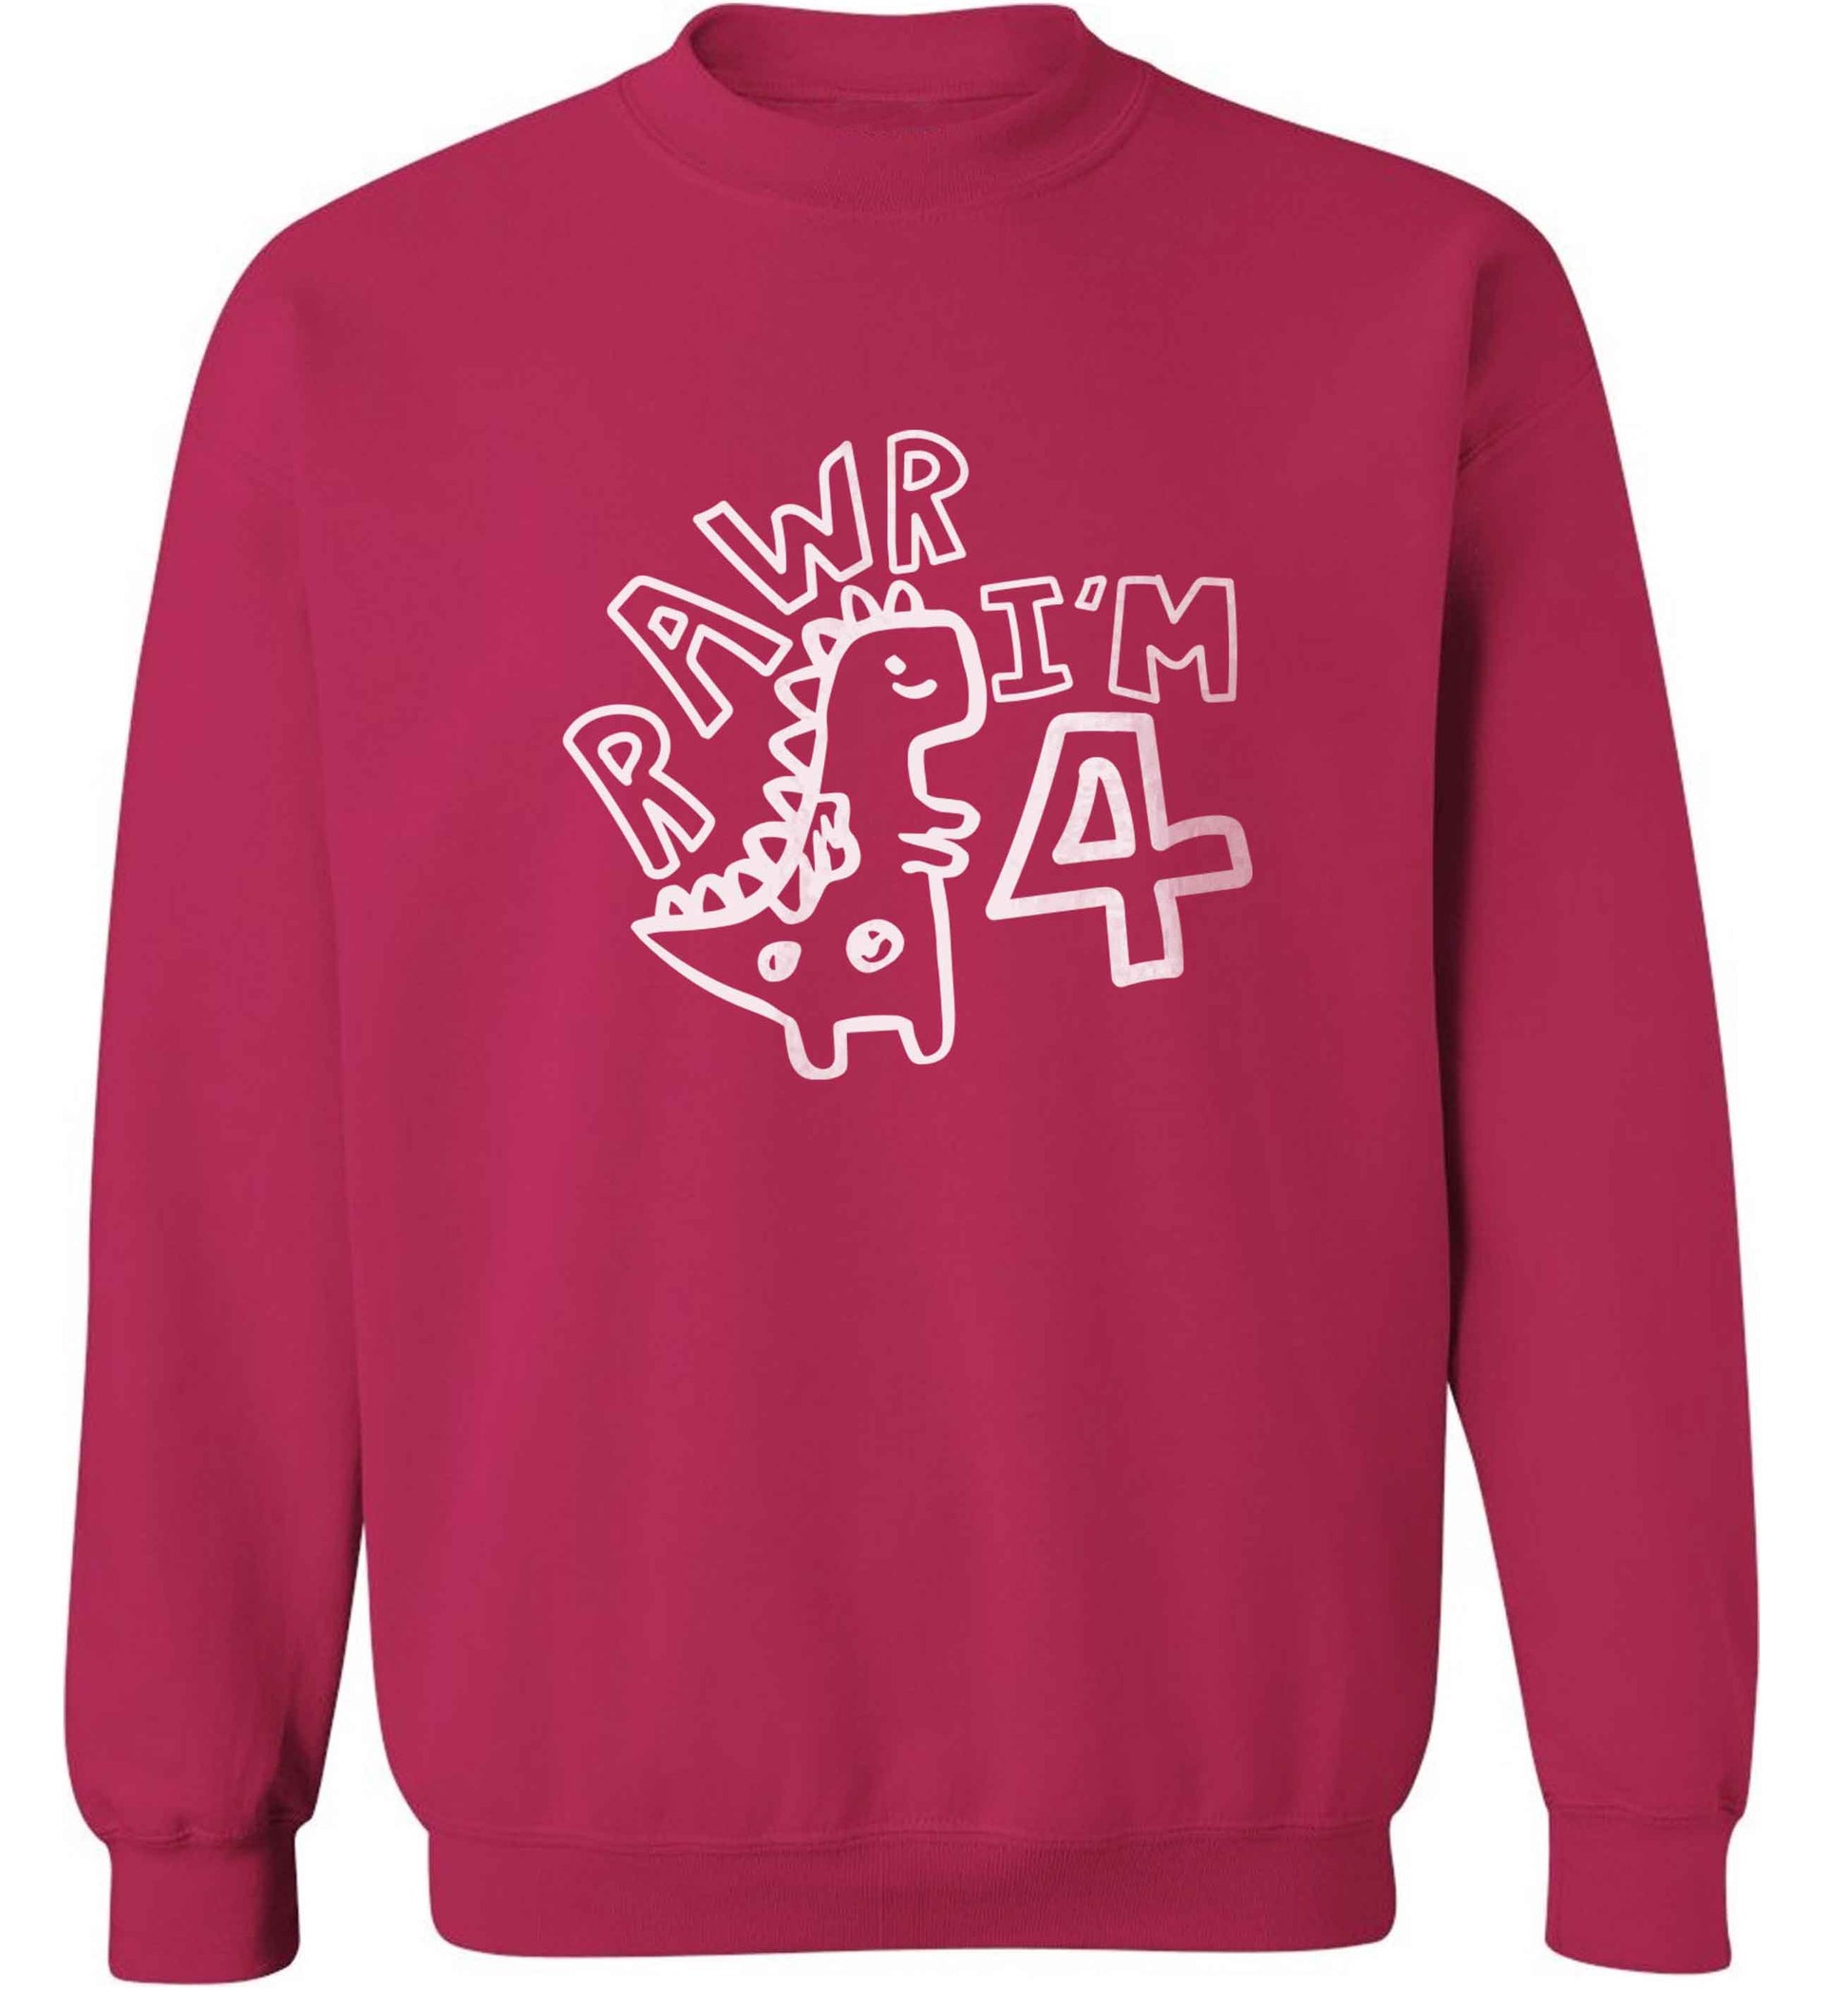 Rawr I'm four - personalise with ANY age! adult's unisex pink sweater 2XL